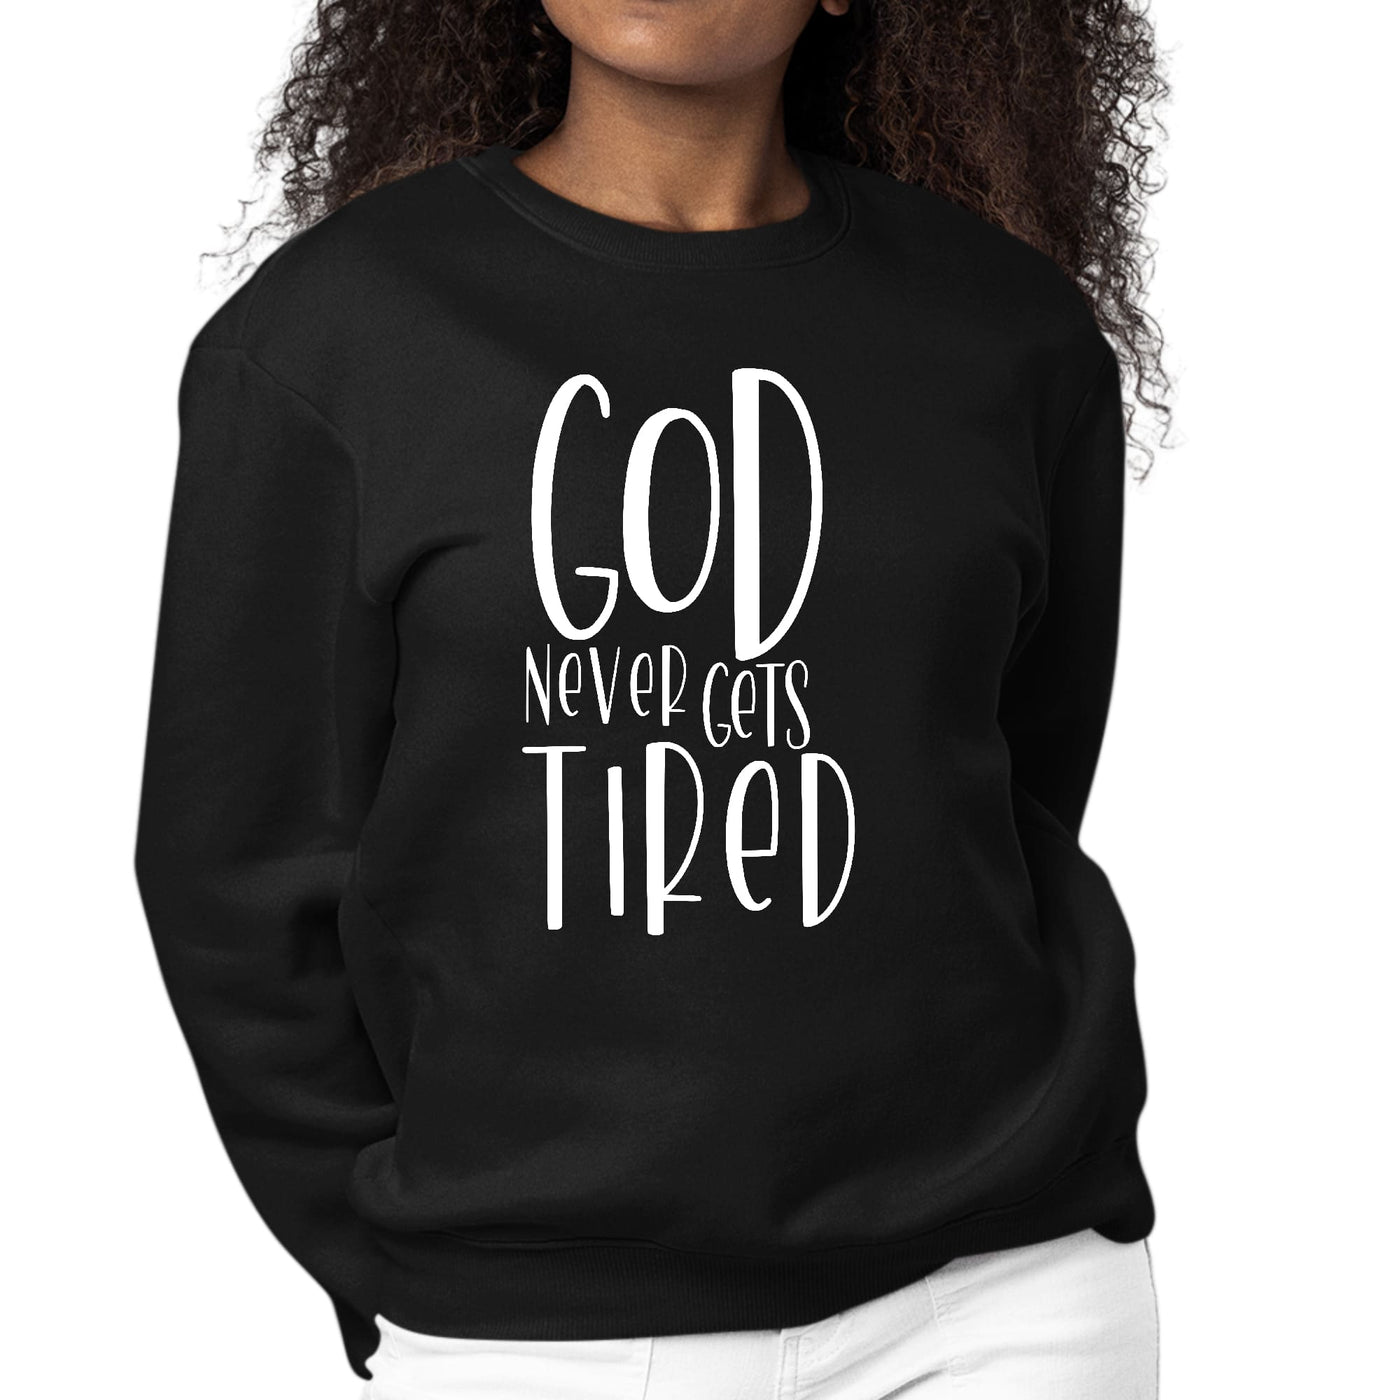 Womens Graphic Sweatshirt Say It Soul - God Never Gets Tired - Womens